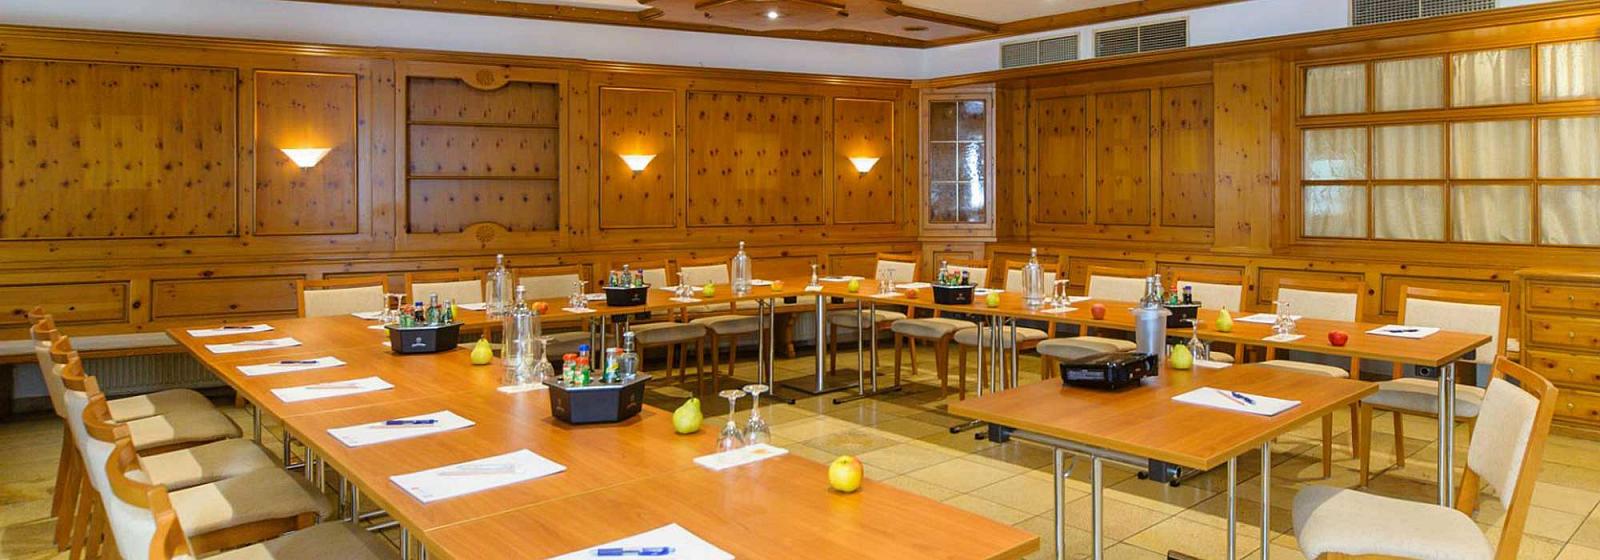 Akzent-Hotel Goldner Stern: Prices for Conference Equipment